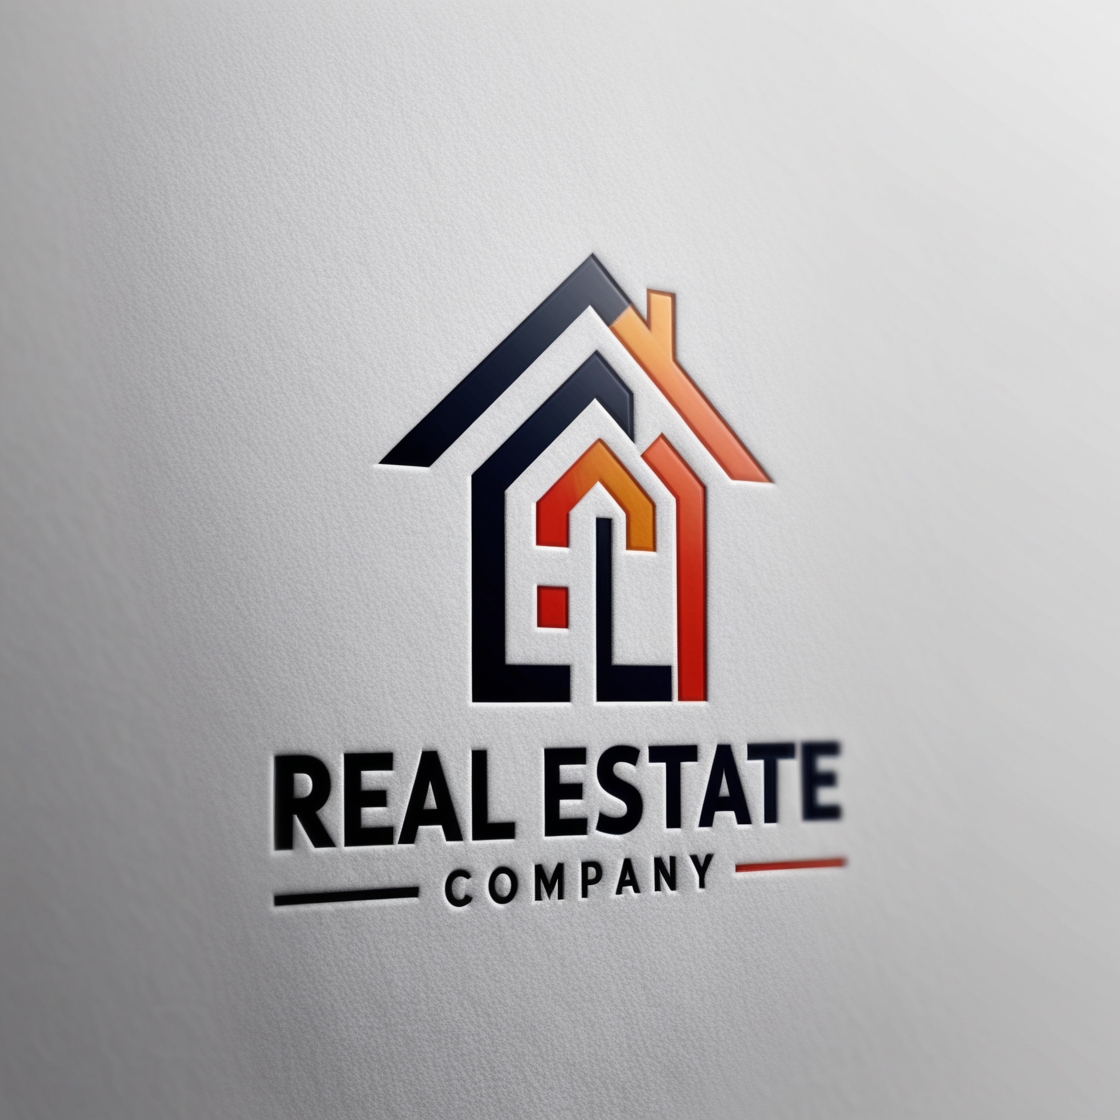 Default_CCreate_a_logo_for_a_real_estate_companyThe_logo_would_2.jpg